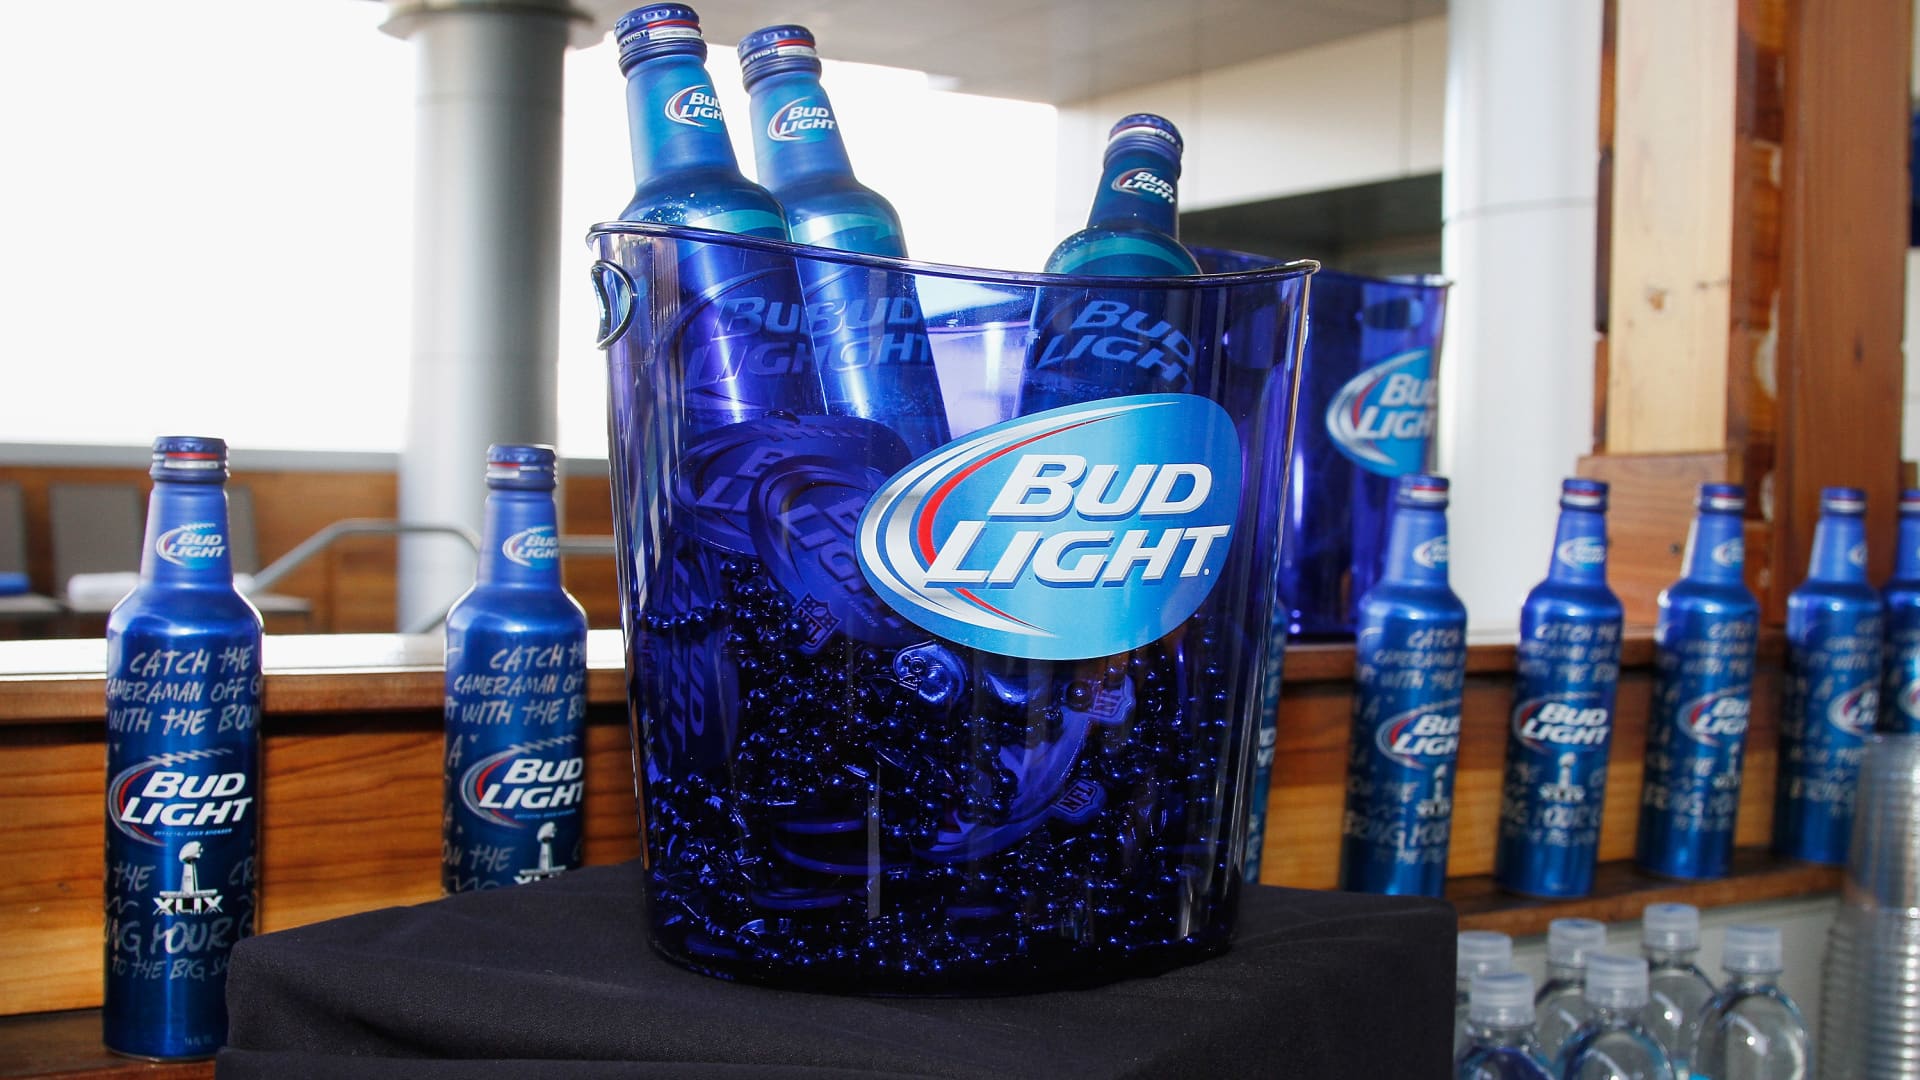 Bud Light boycott is the talk of the town at the prestigious Cannes Lions ad festival